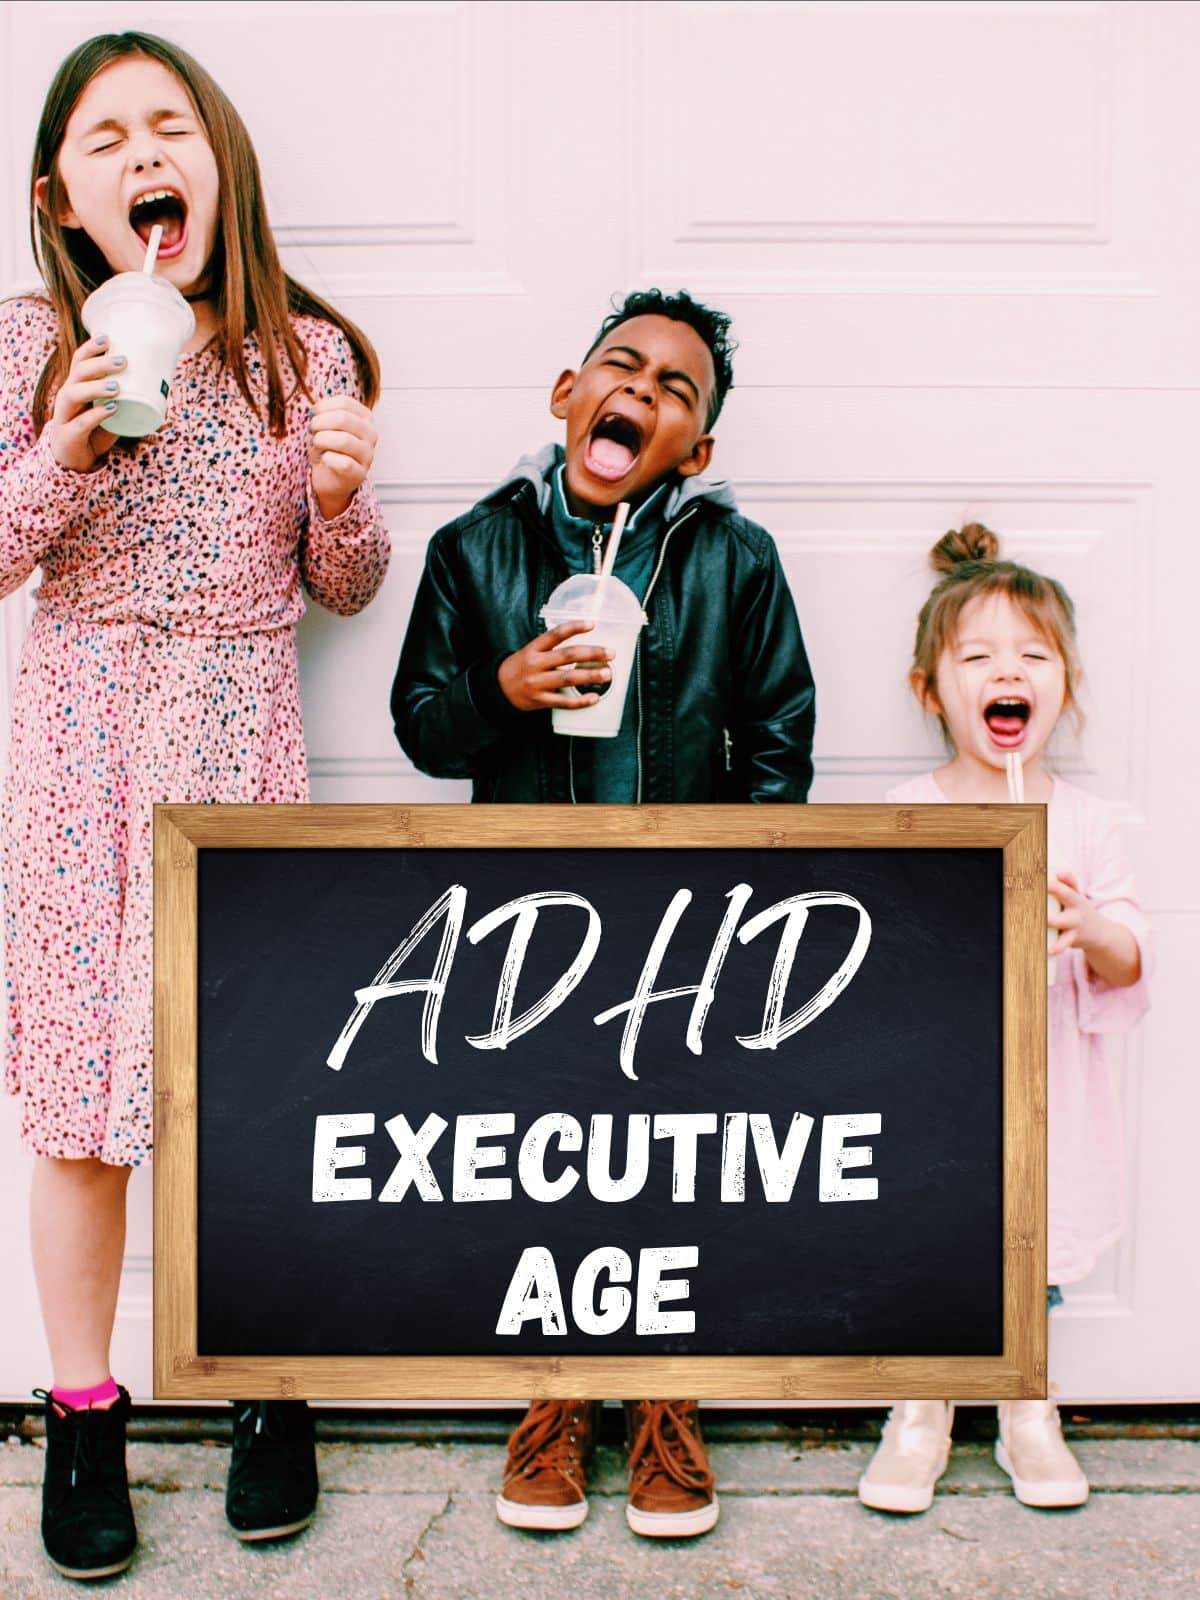 Three hyper kids holding drinks with the text "ADHD executive age."